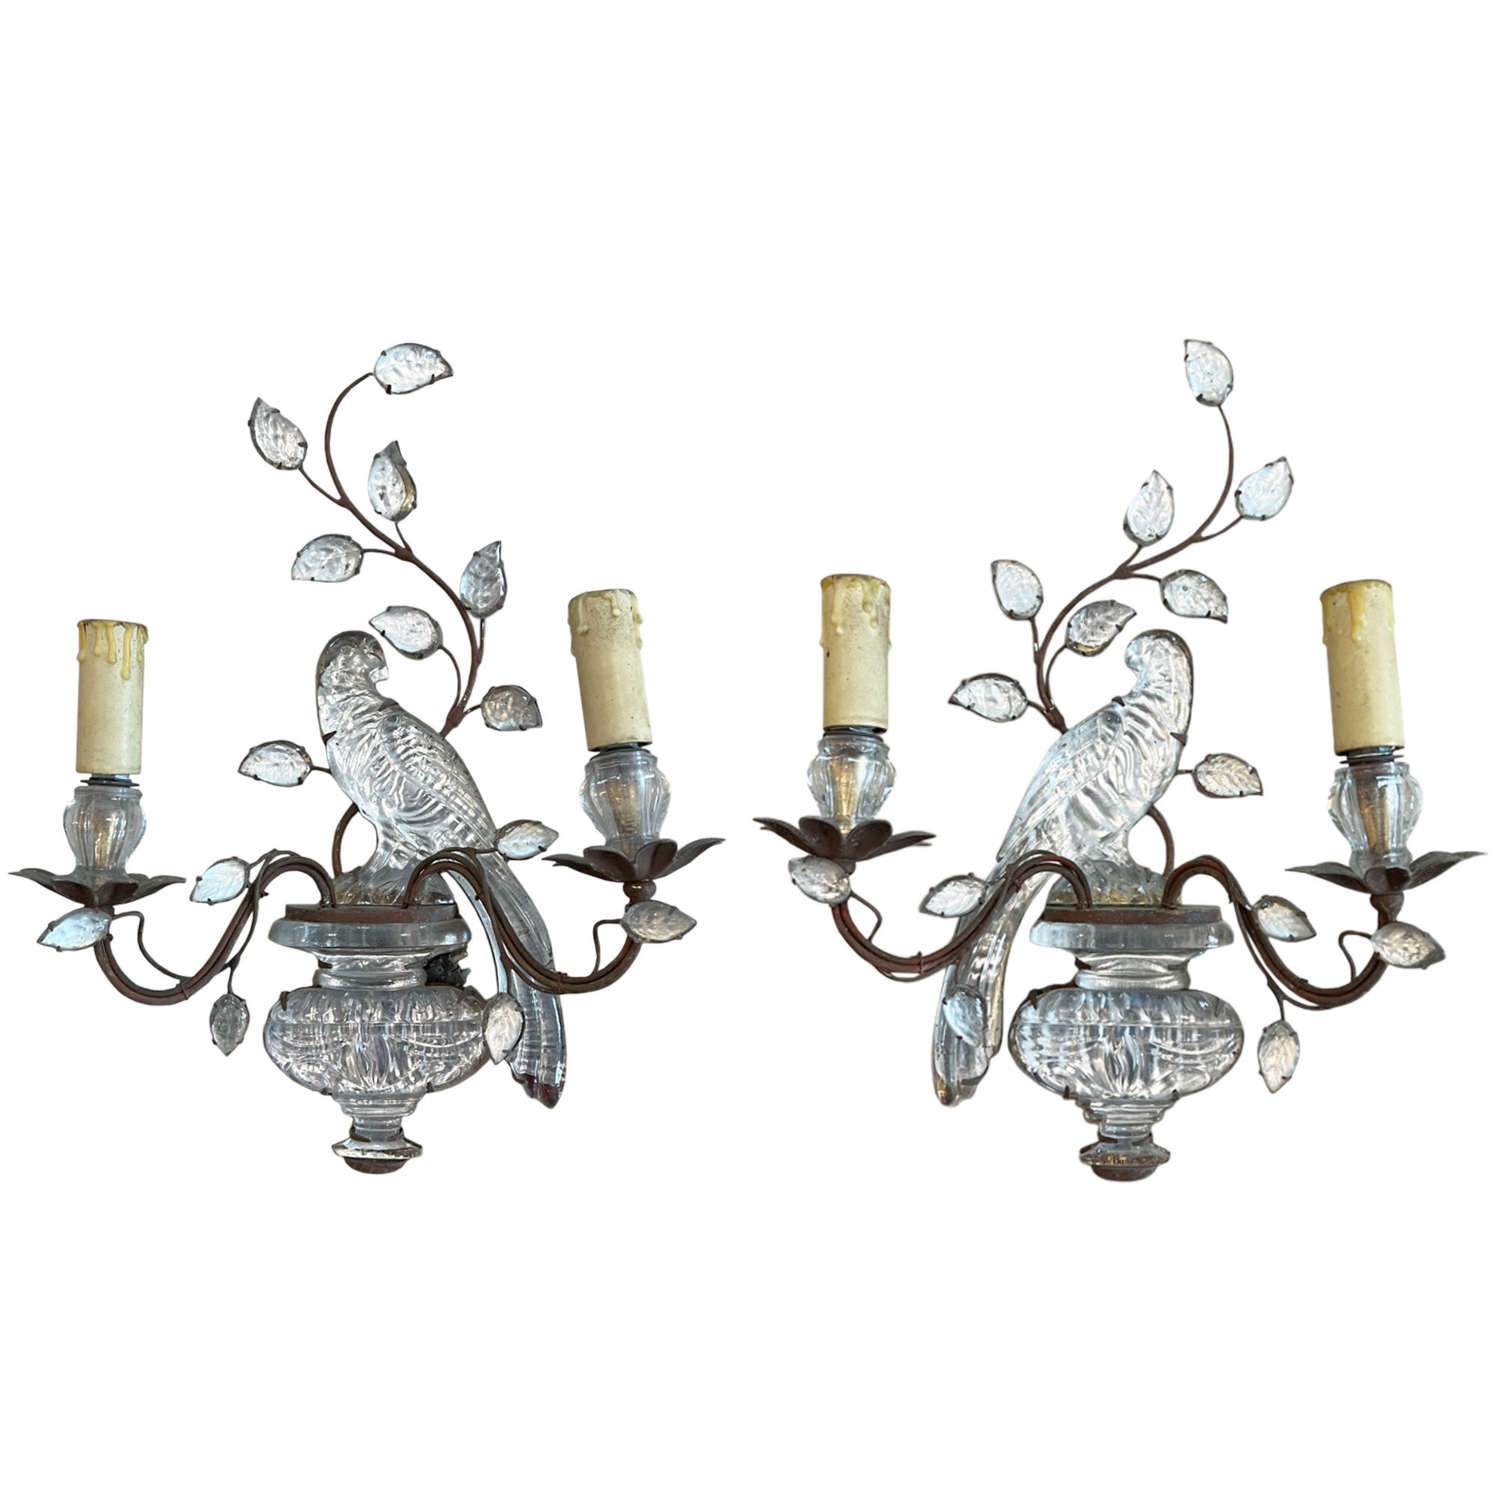 Pair of Maison Baguès Wall Sconces With Parrot and Urn Decoration